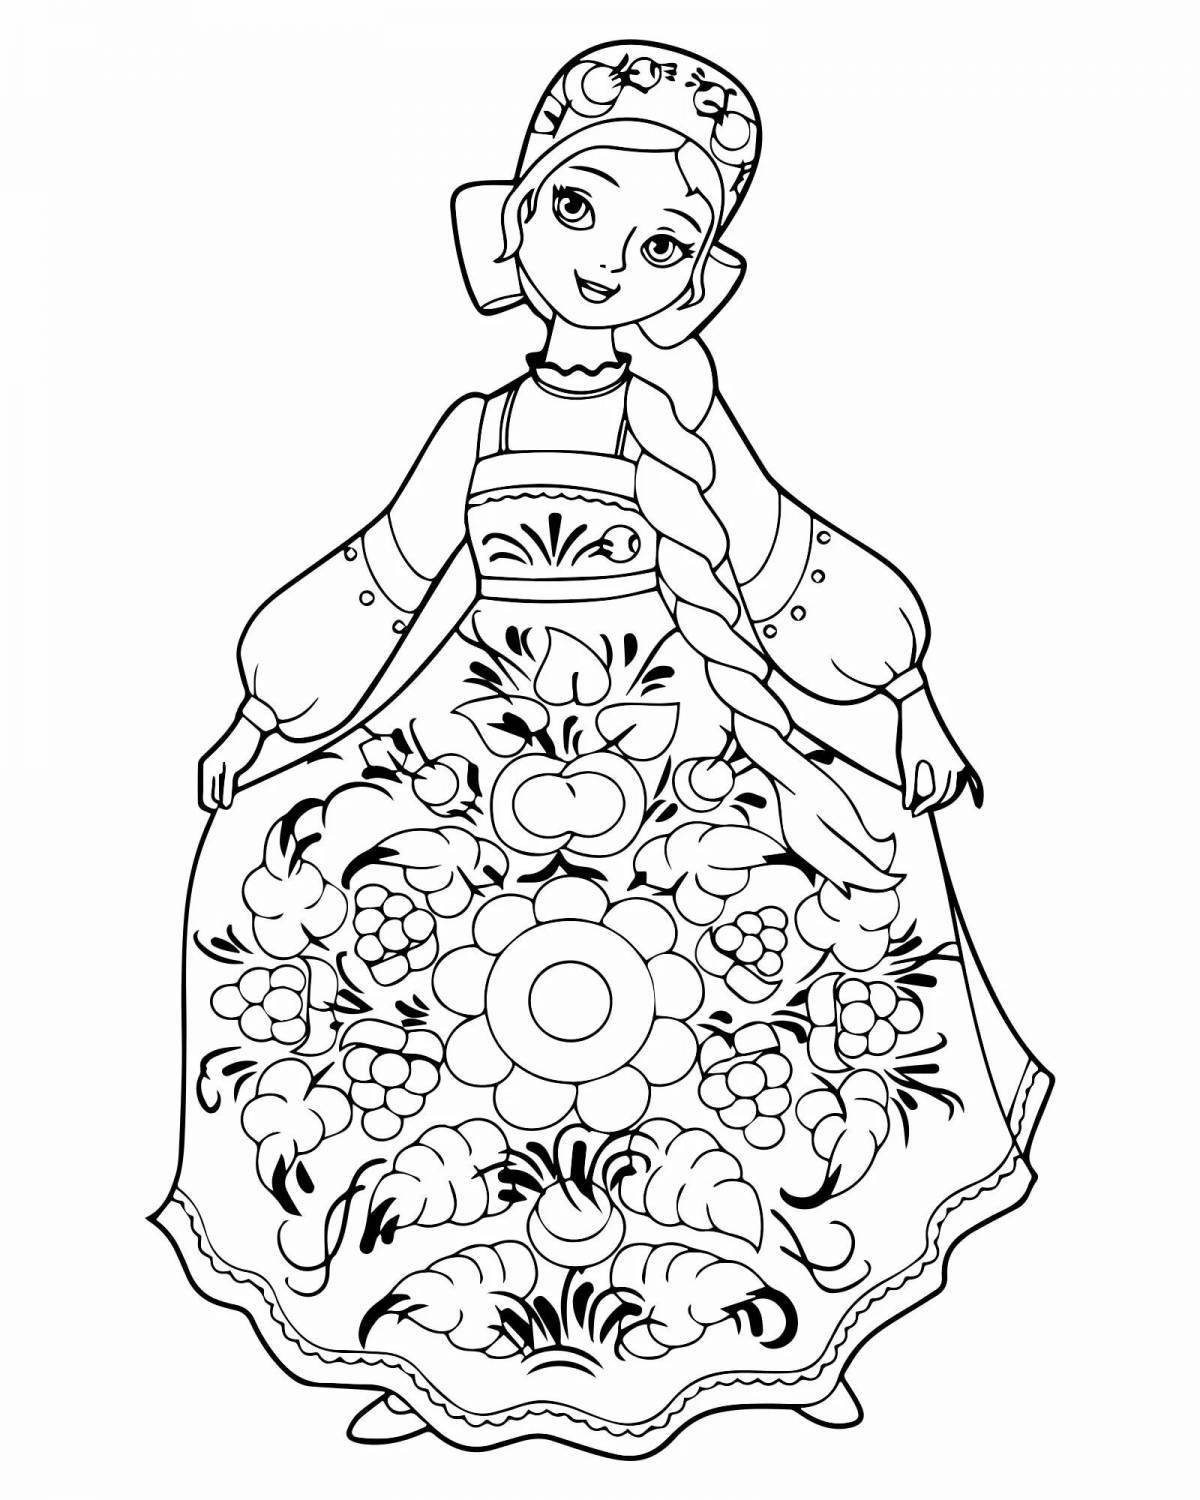 Merry Russian folk costume coloring for children